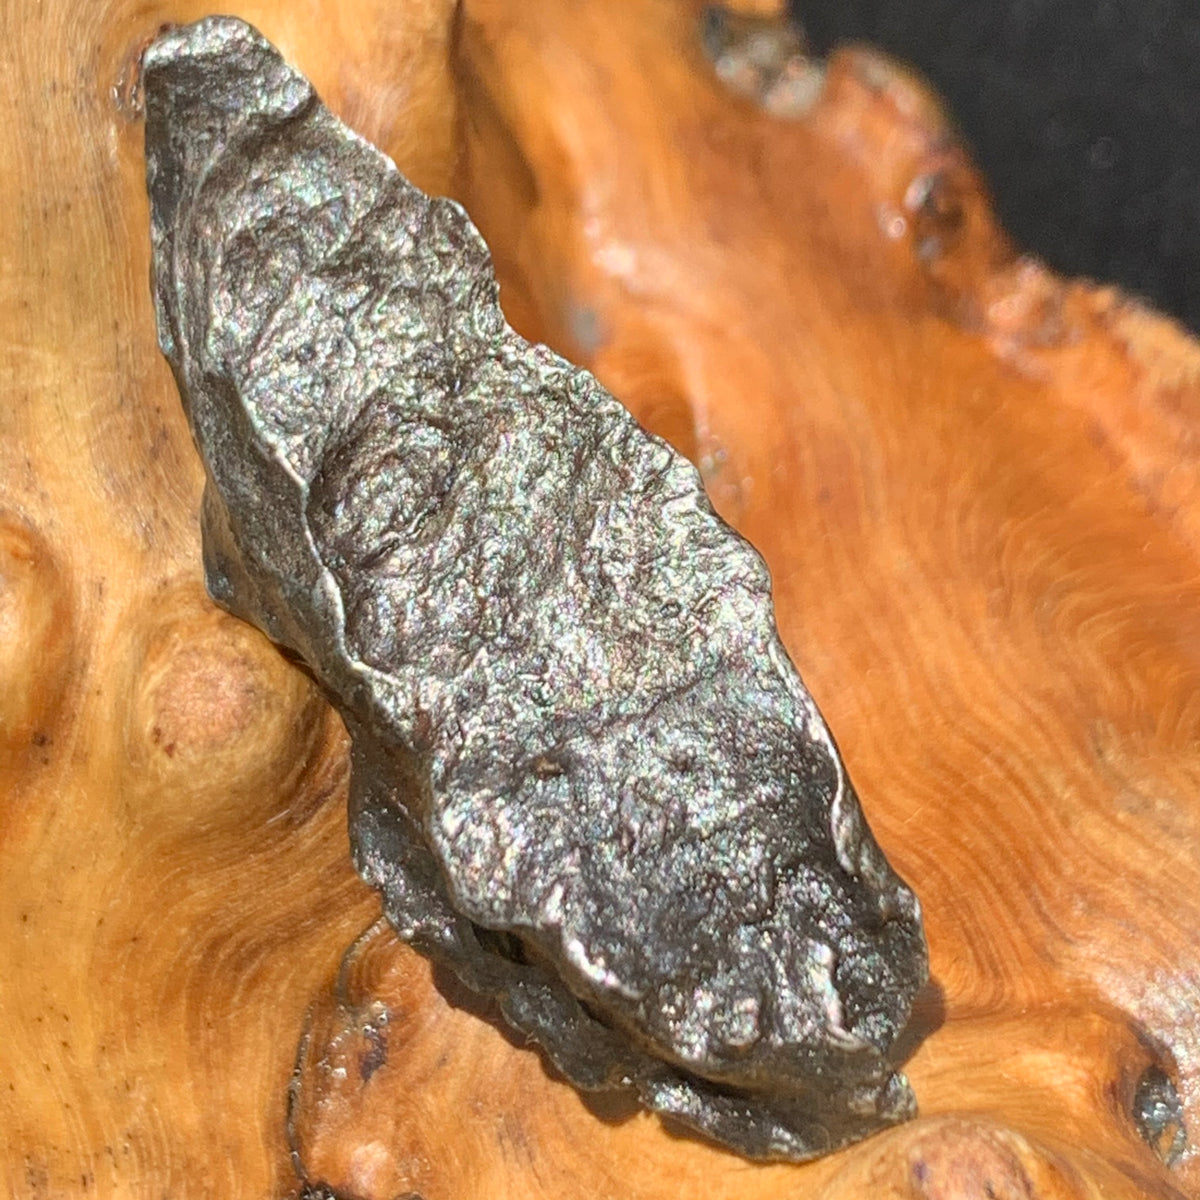 silver sikhote alin meteorite sitting on driftwood for display